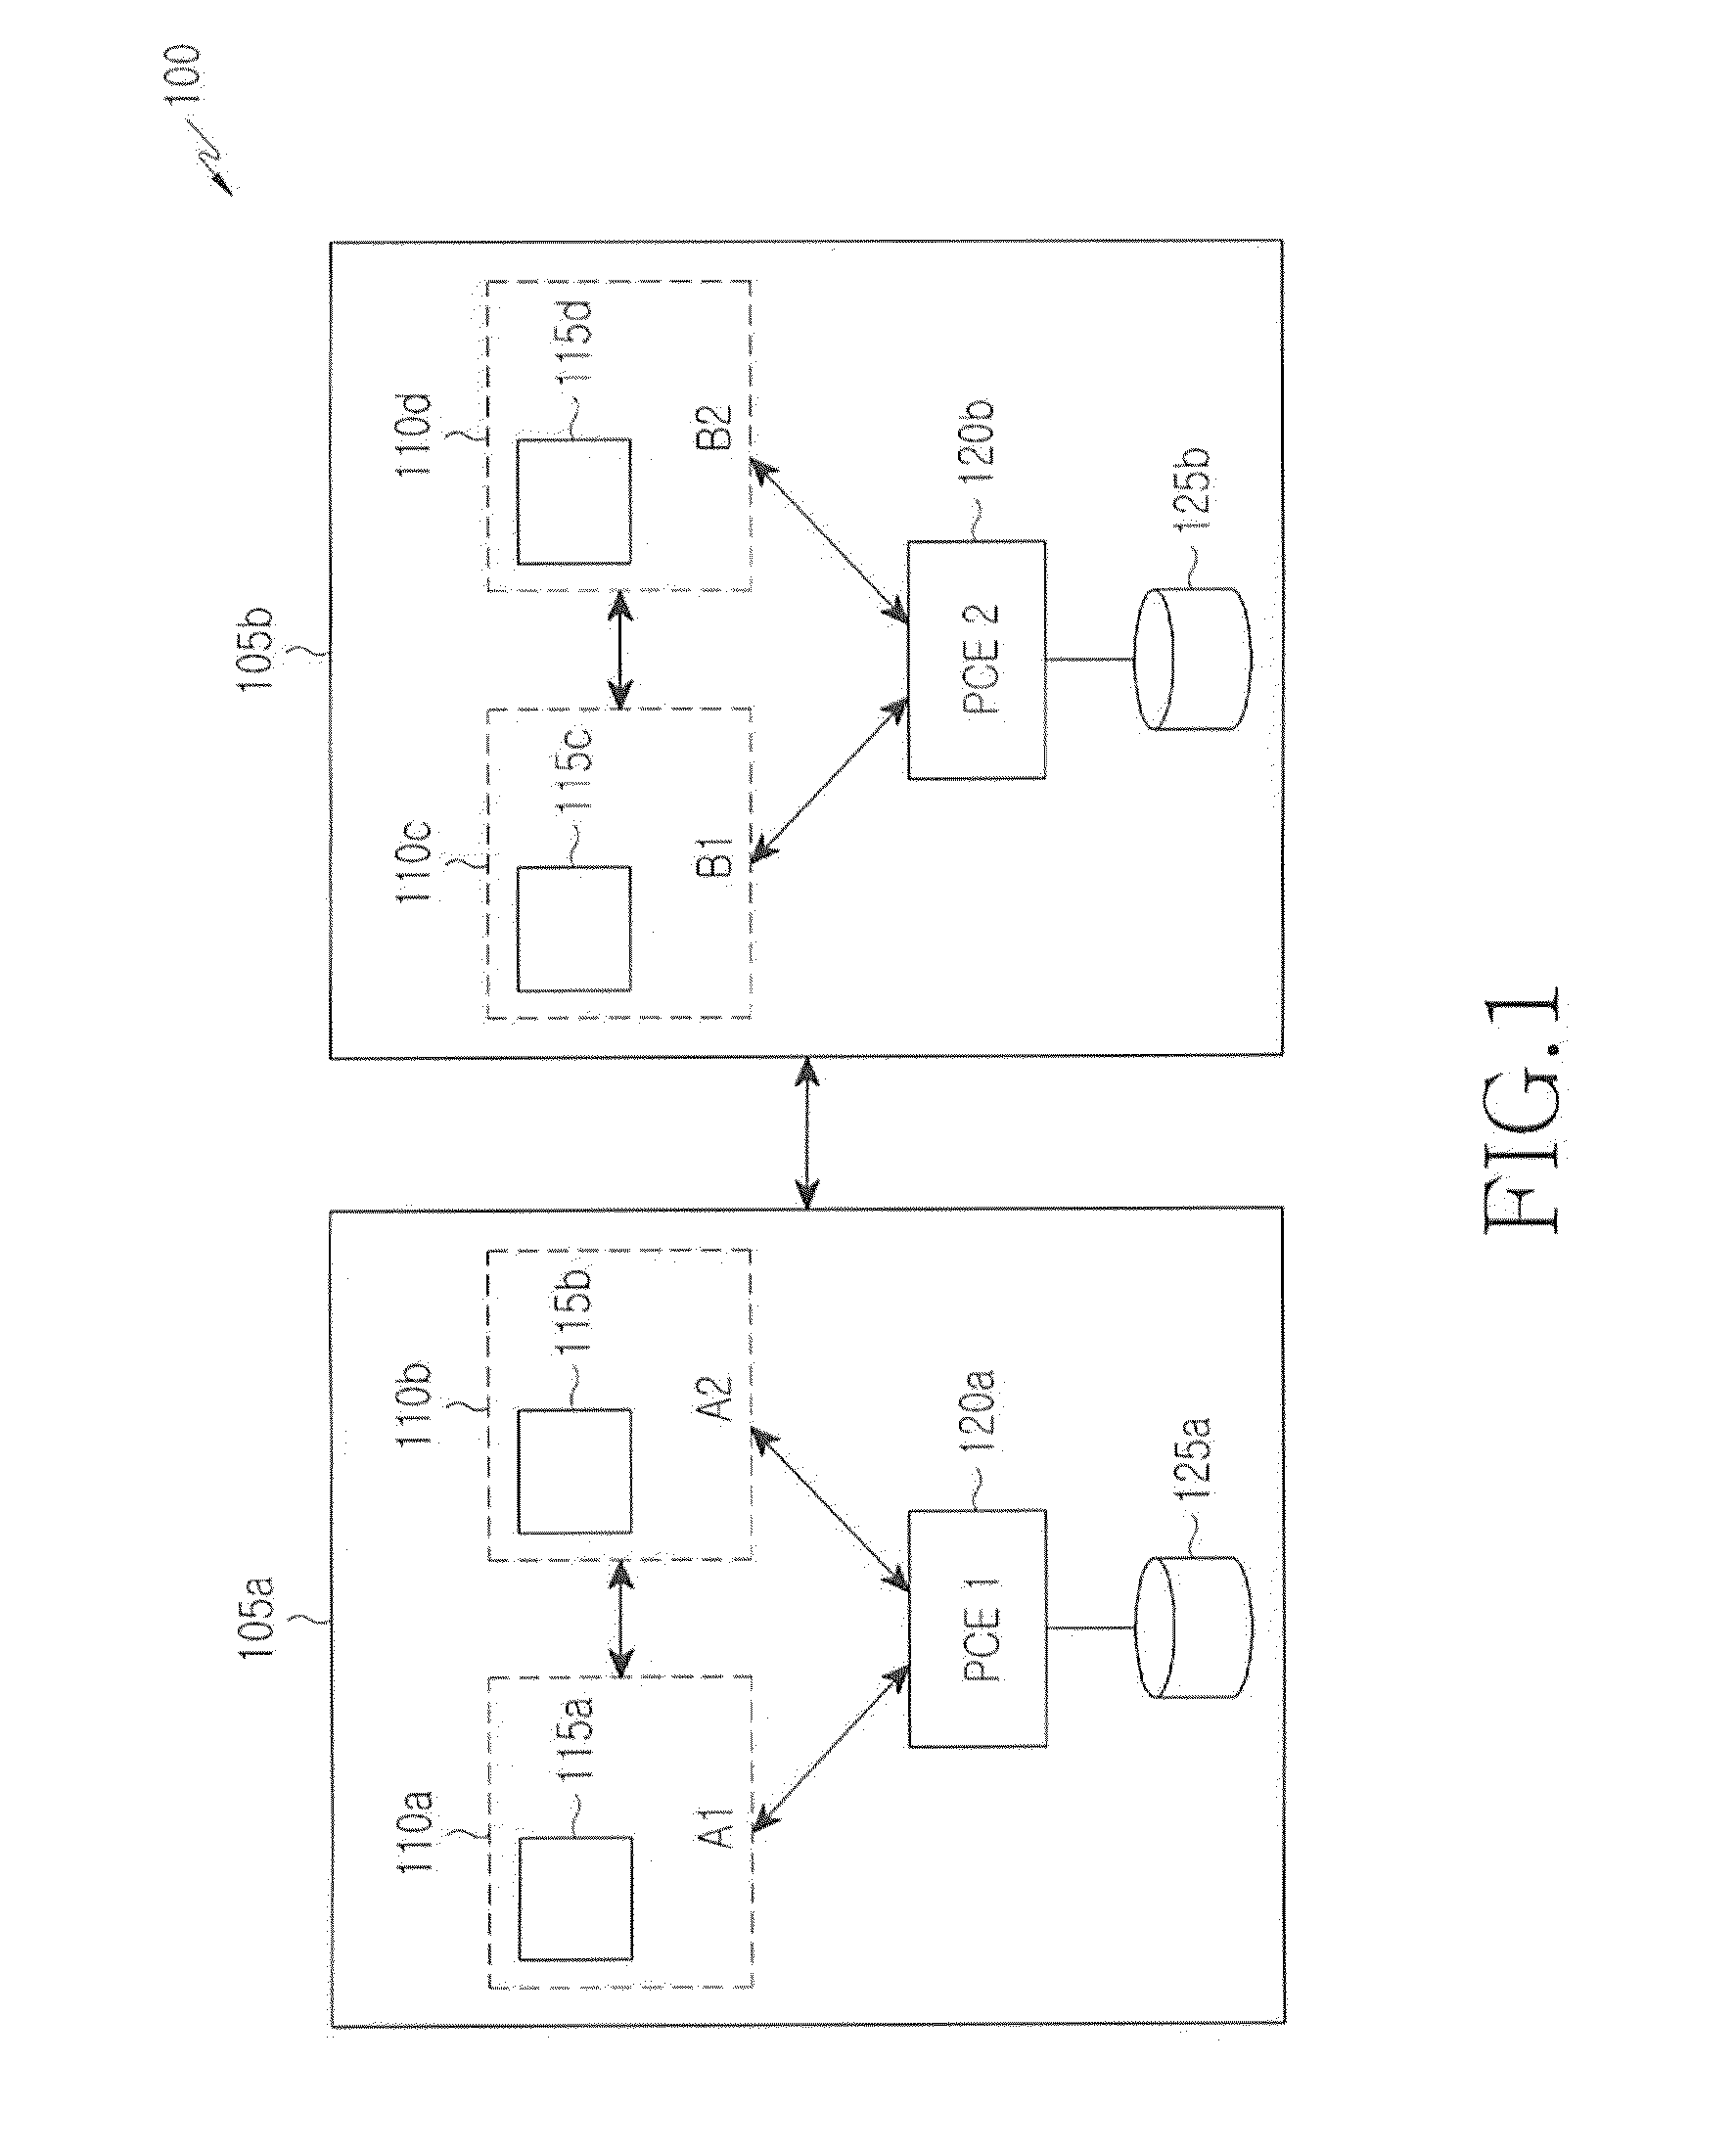 Method and system for enhancing routing in multiprotocol label switching (MPLS)